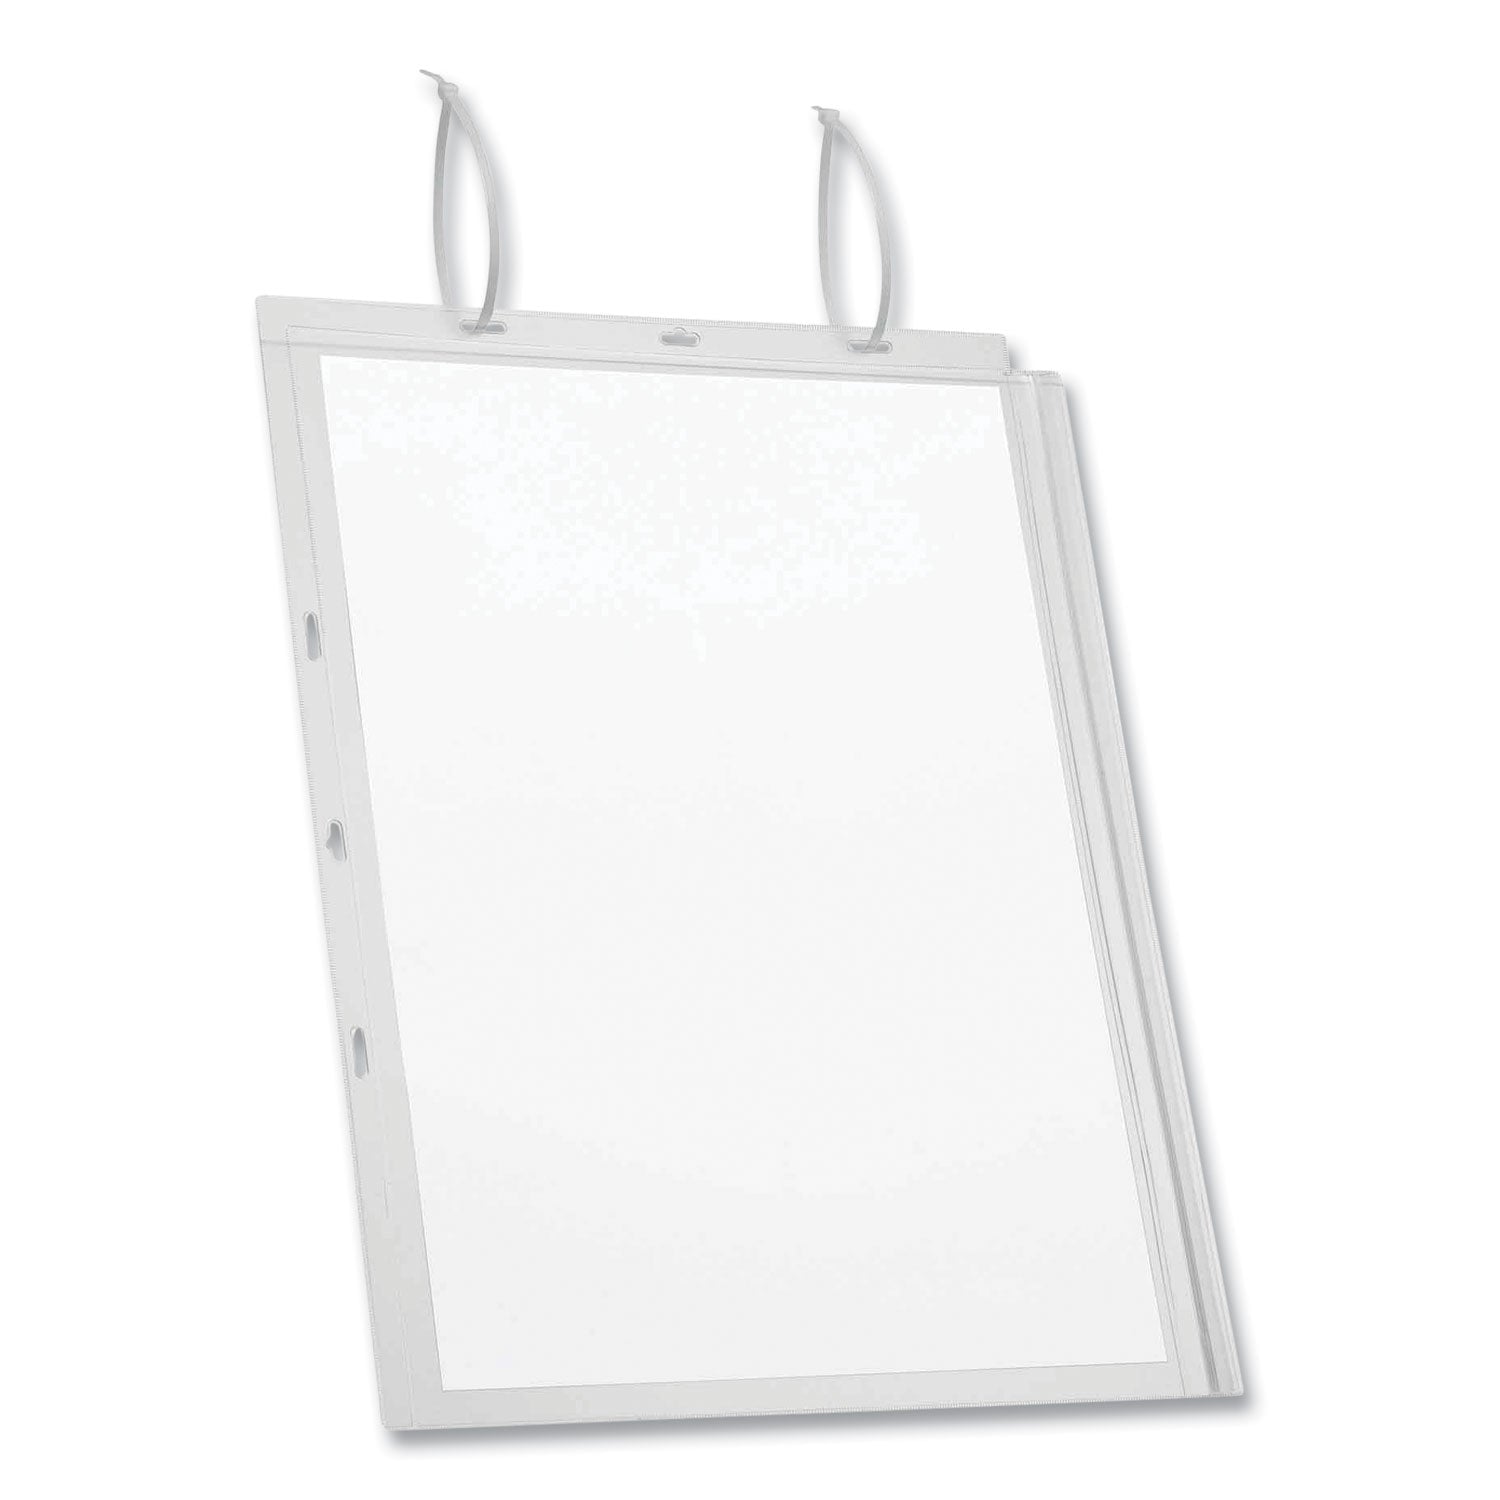 water-resistant-sign-holder-pockets-with-cable-ties-11-x-17-clear-frame-5-pack_dbl502819 - 8